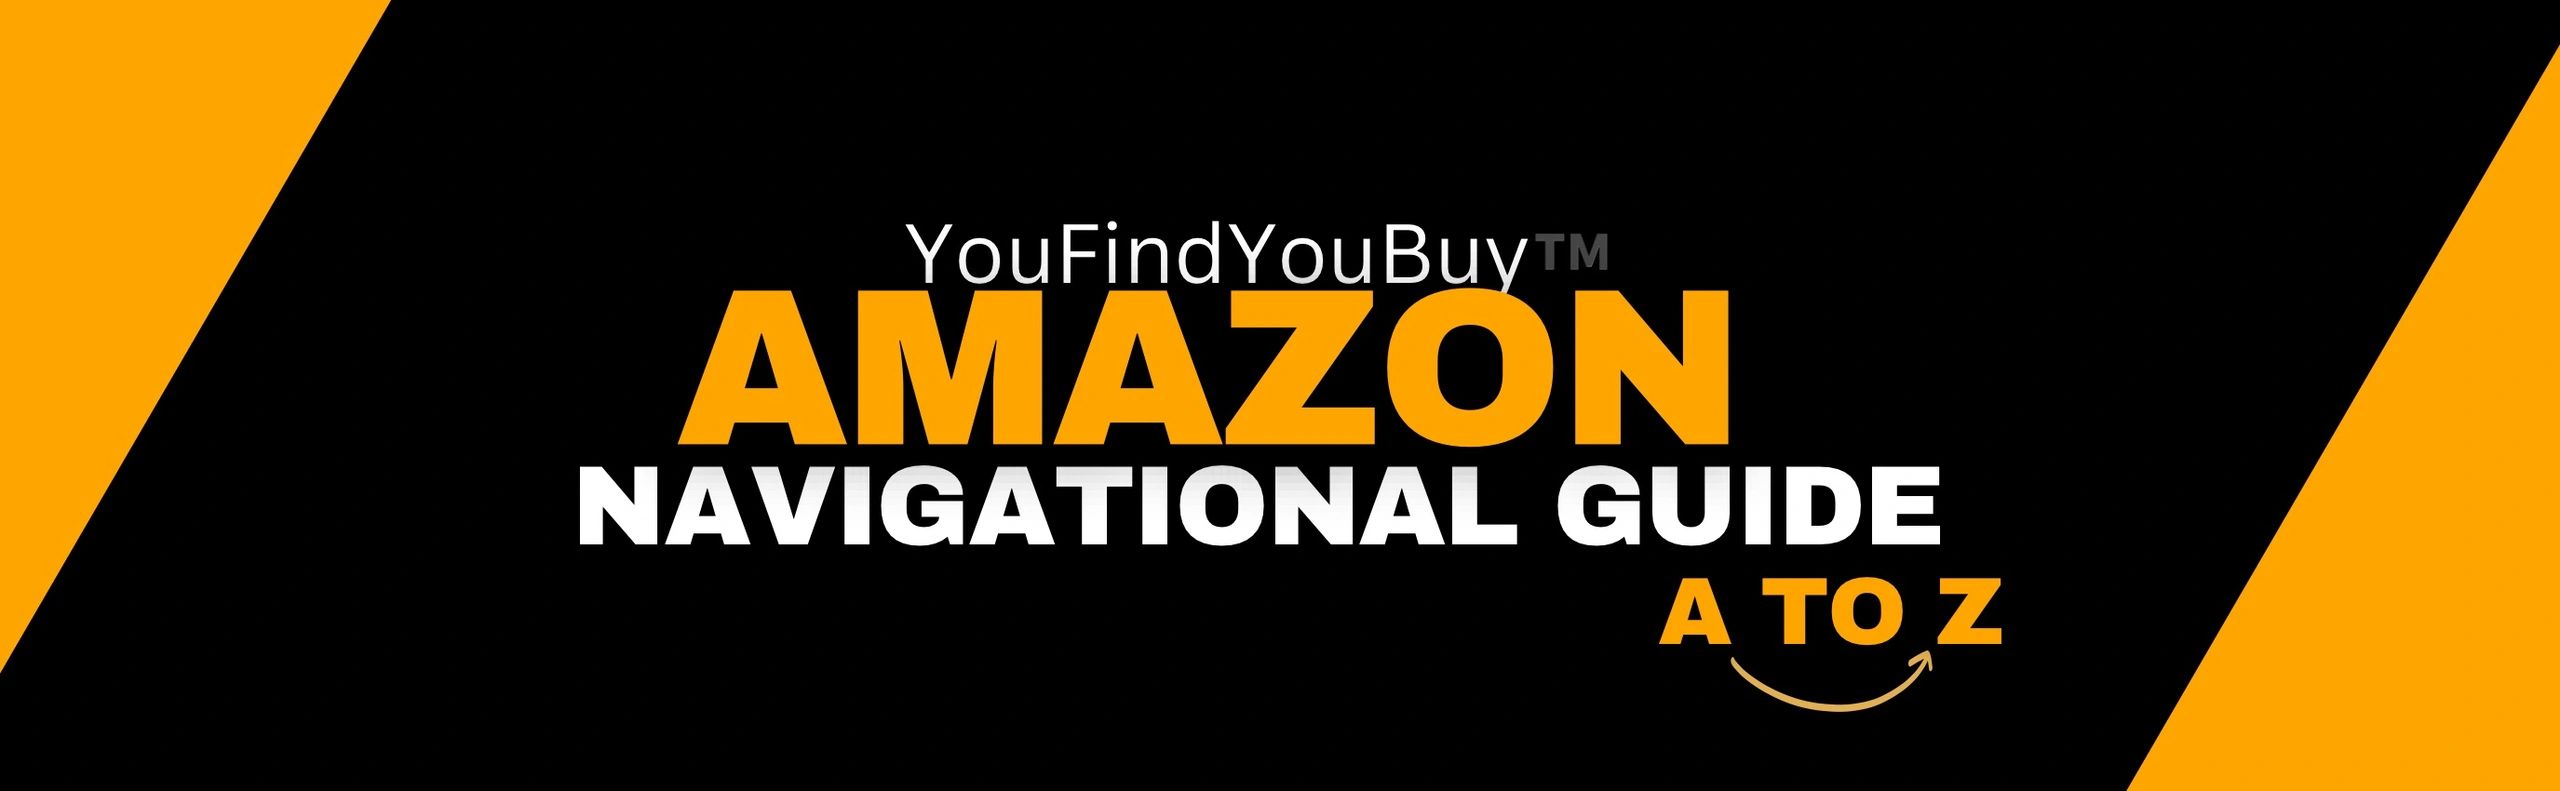 Amazon.com Navigation Guide From A to Z - YouFindYouBuy